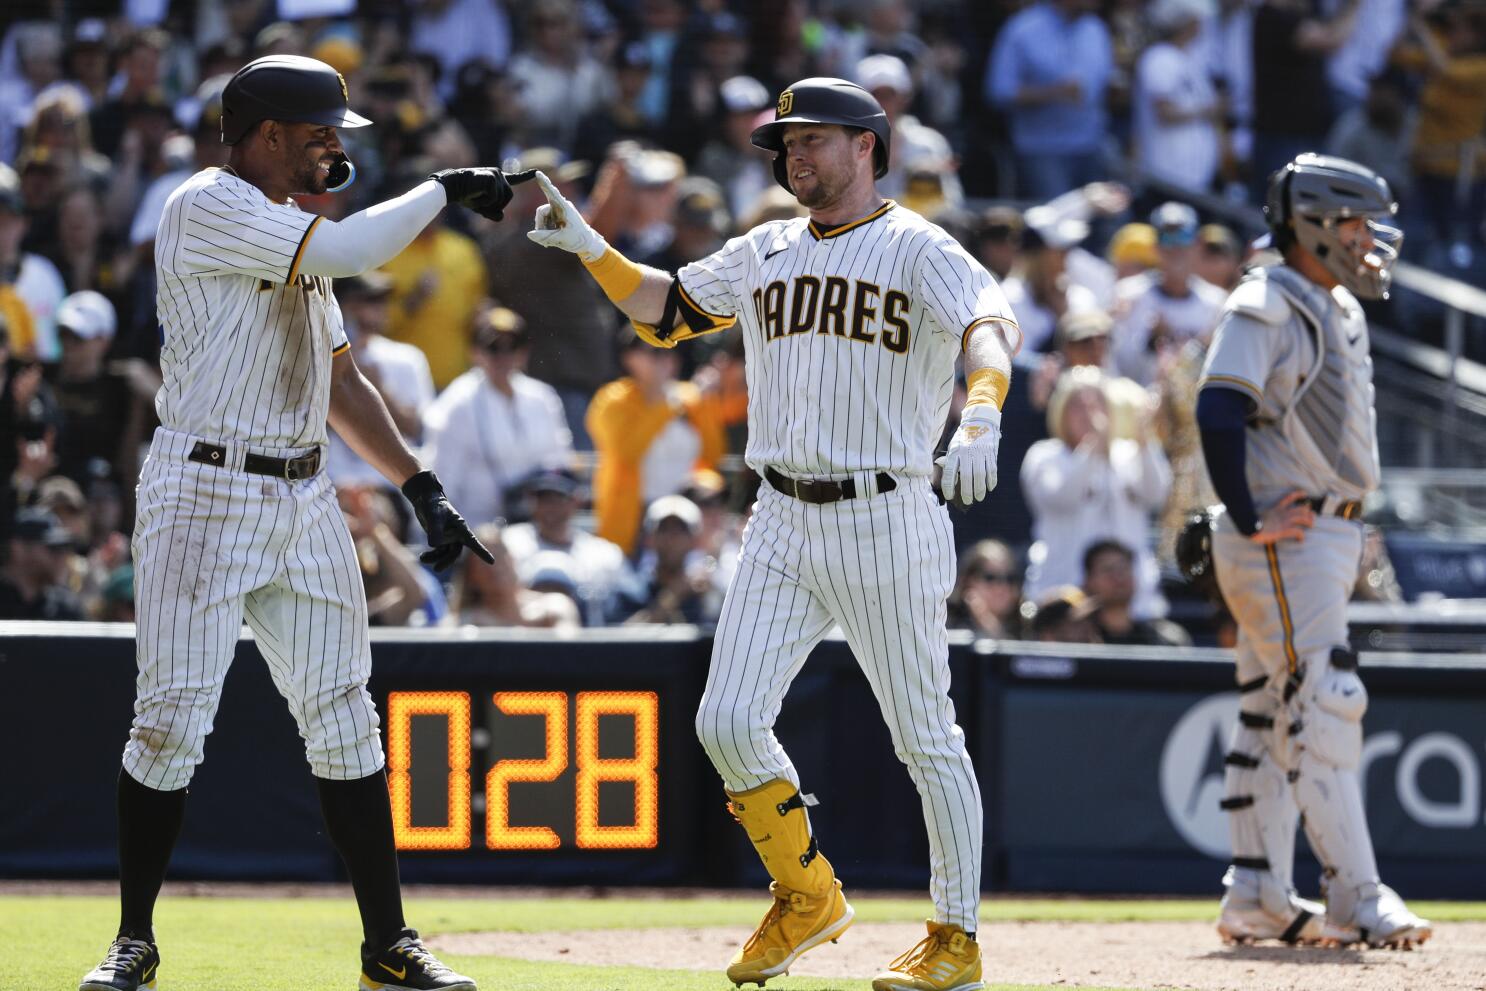 Cronenworth's 2 HRs, 6 RBIs lead Padres past Brewers 10-3 - The